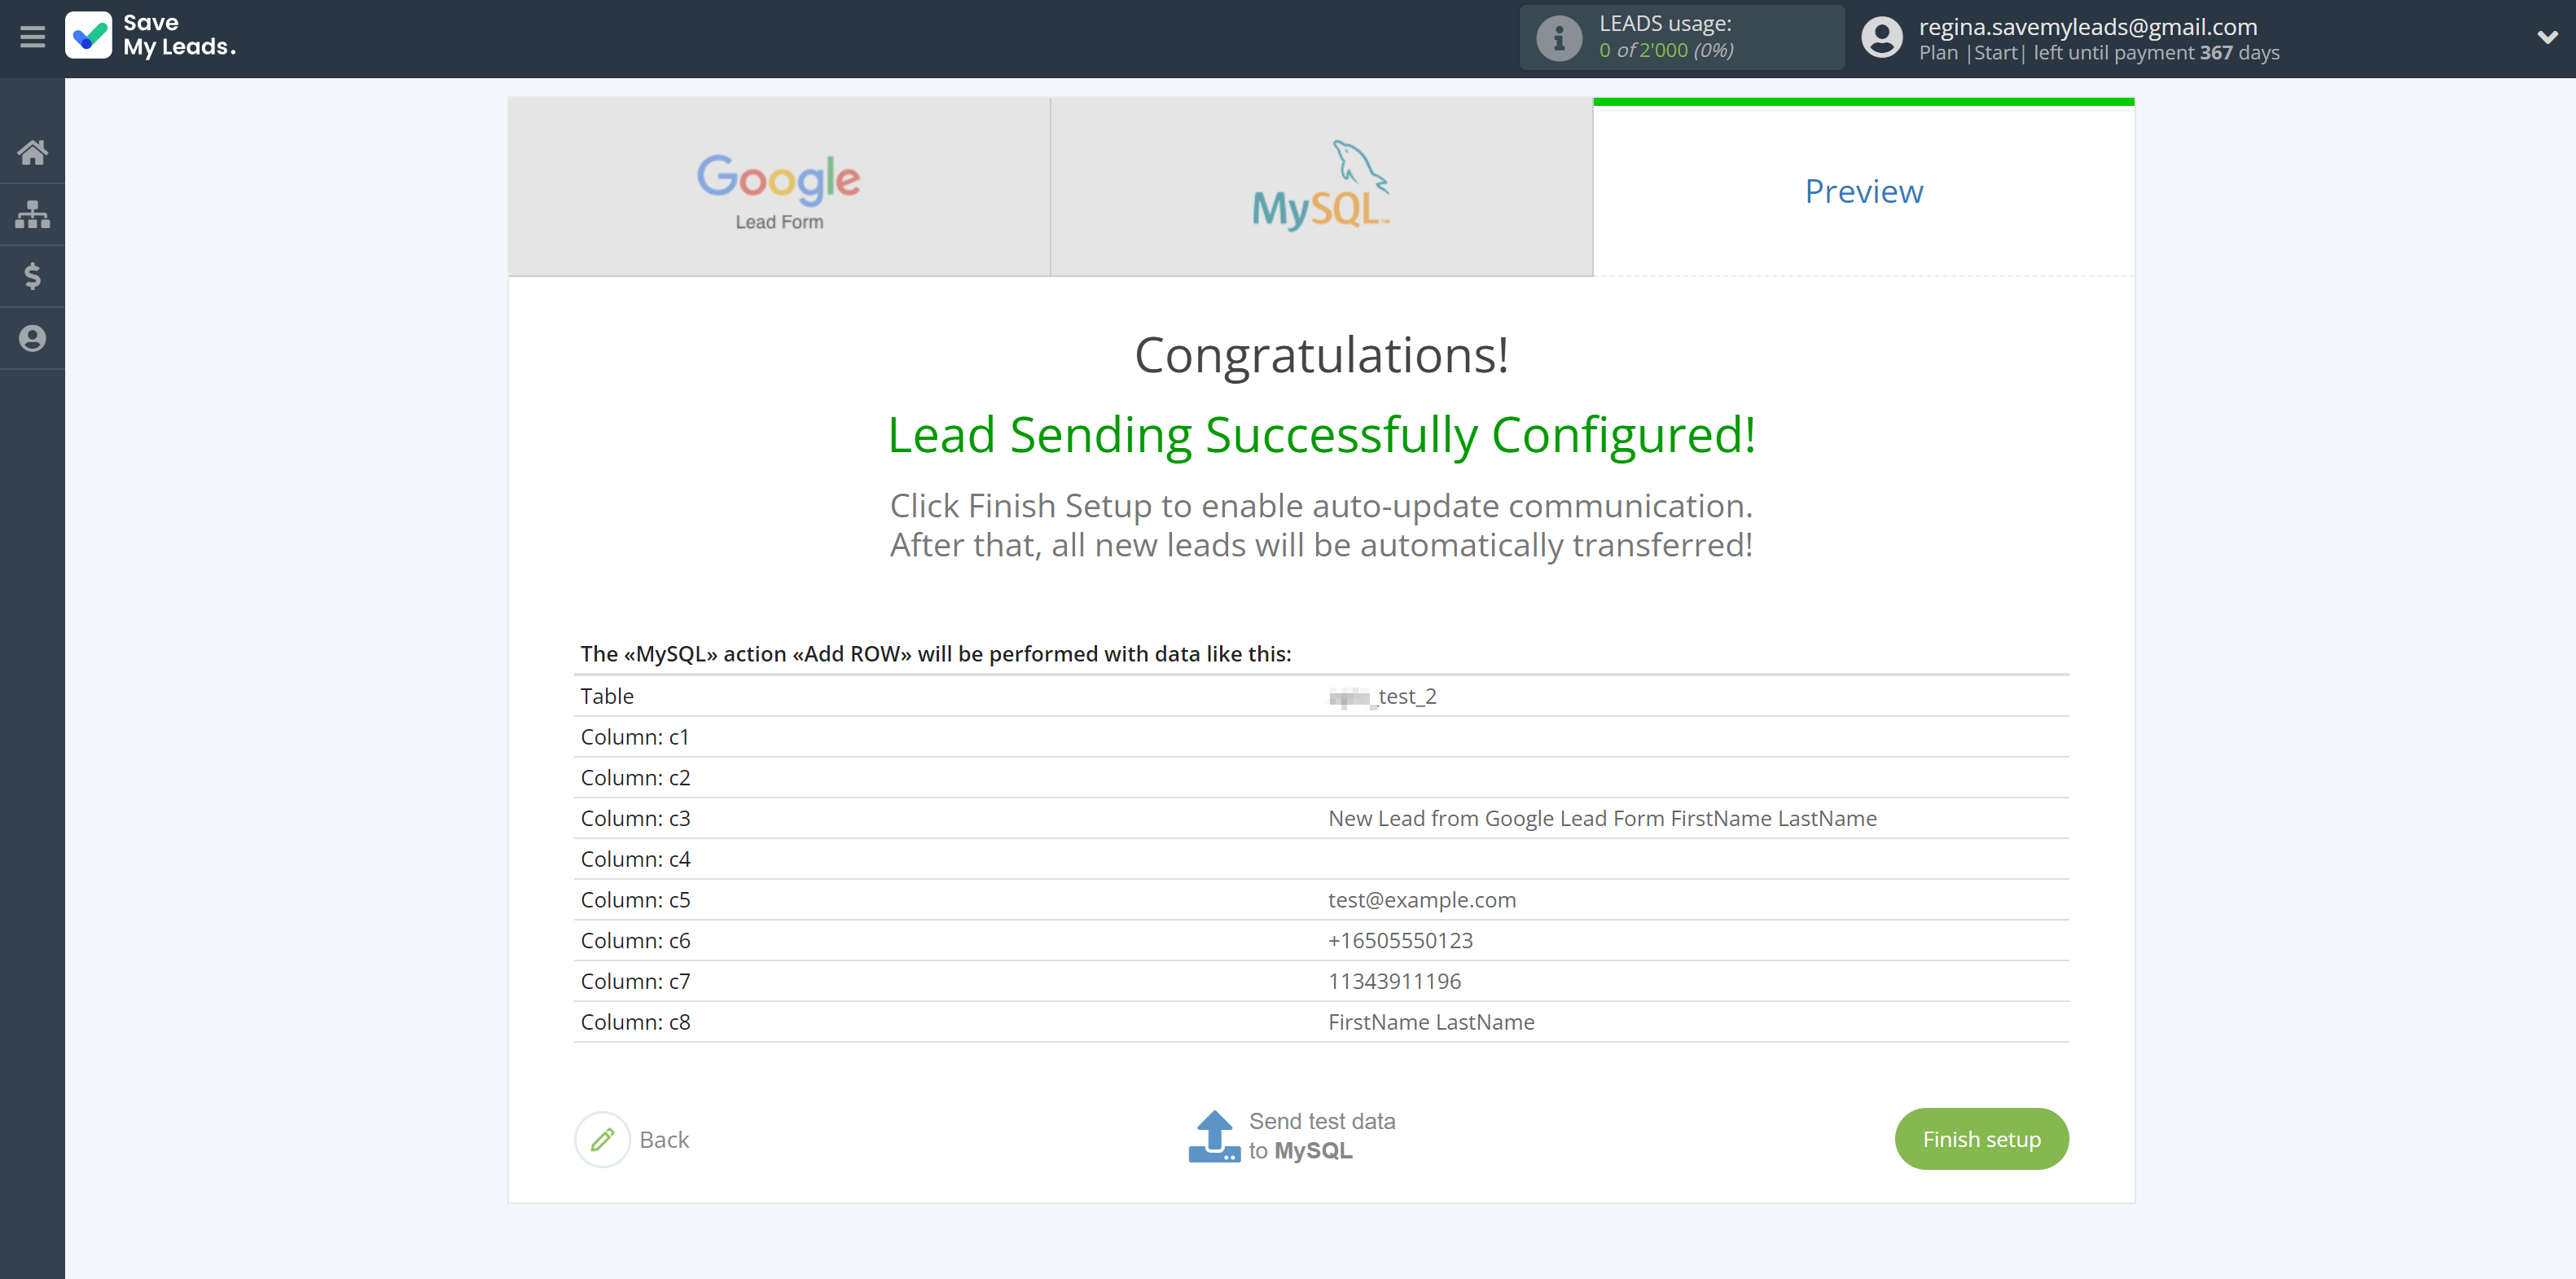 How to Connect Google Lead Form with MySQL | Test data